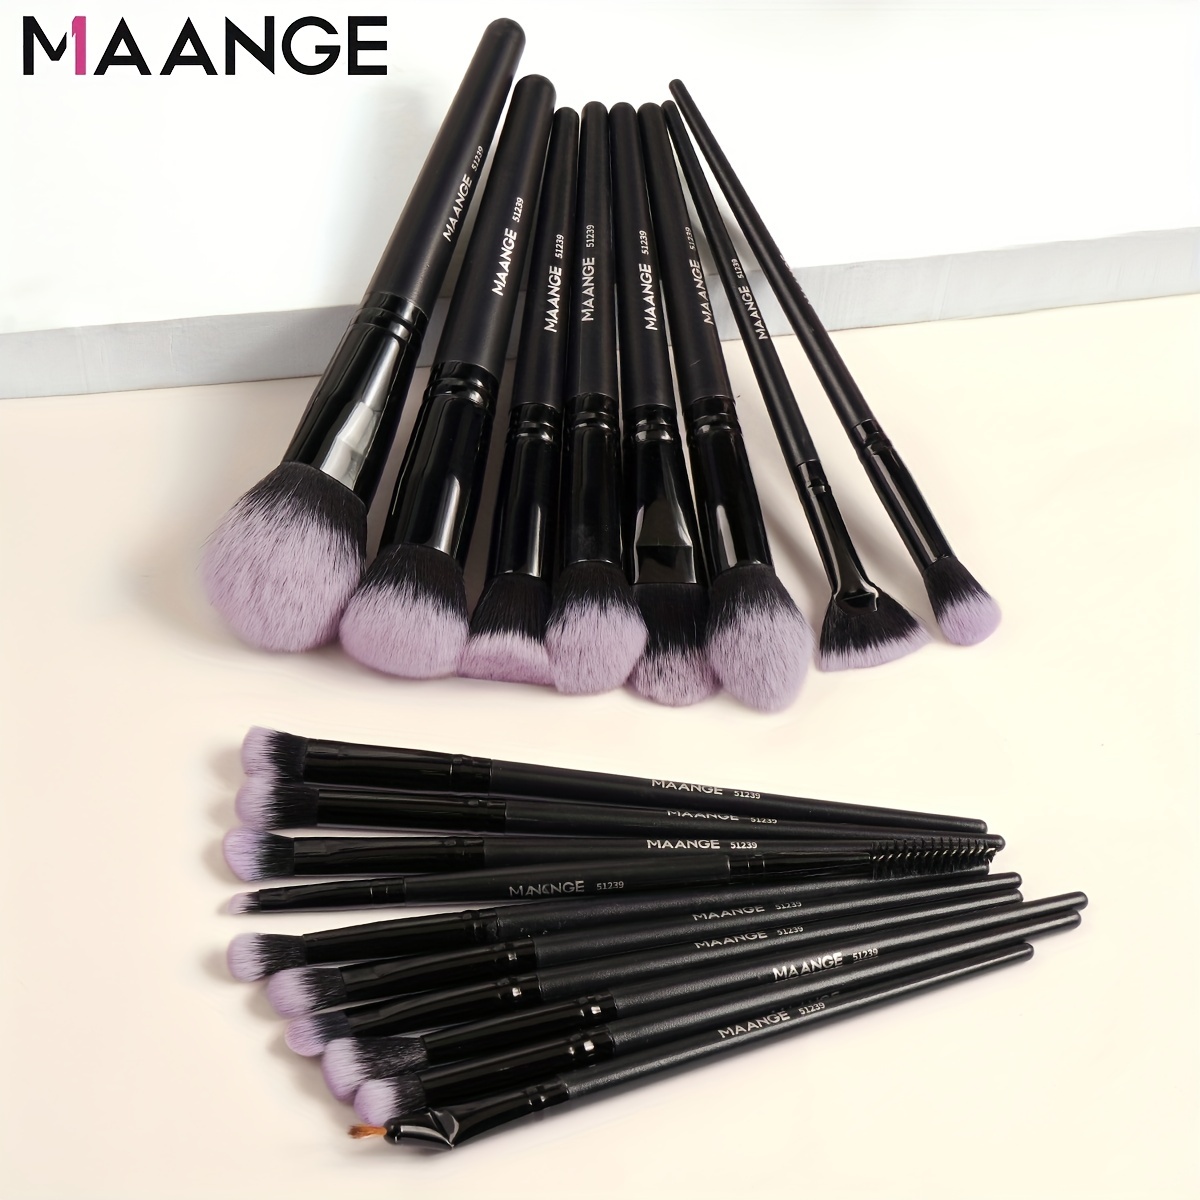 

18pcs Premium Synthetic Makeup Brush Set - Complete Functional Kit For Face, Eye, Lip, And Blush Application - Ideal For Beginner Artists And Professional Makeup Enthusiasts